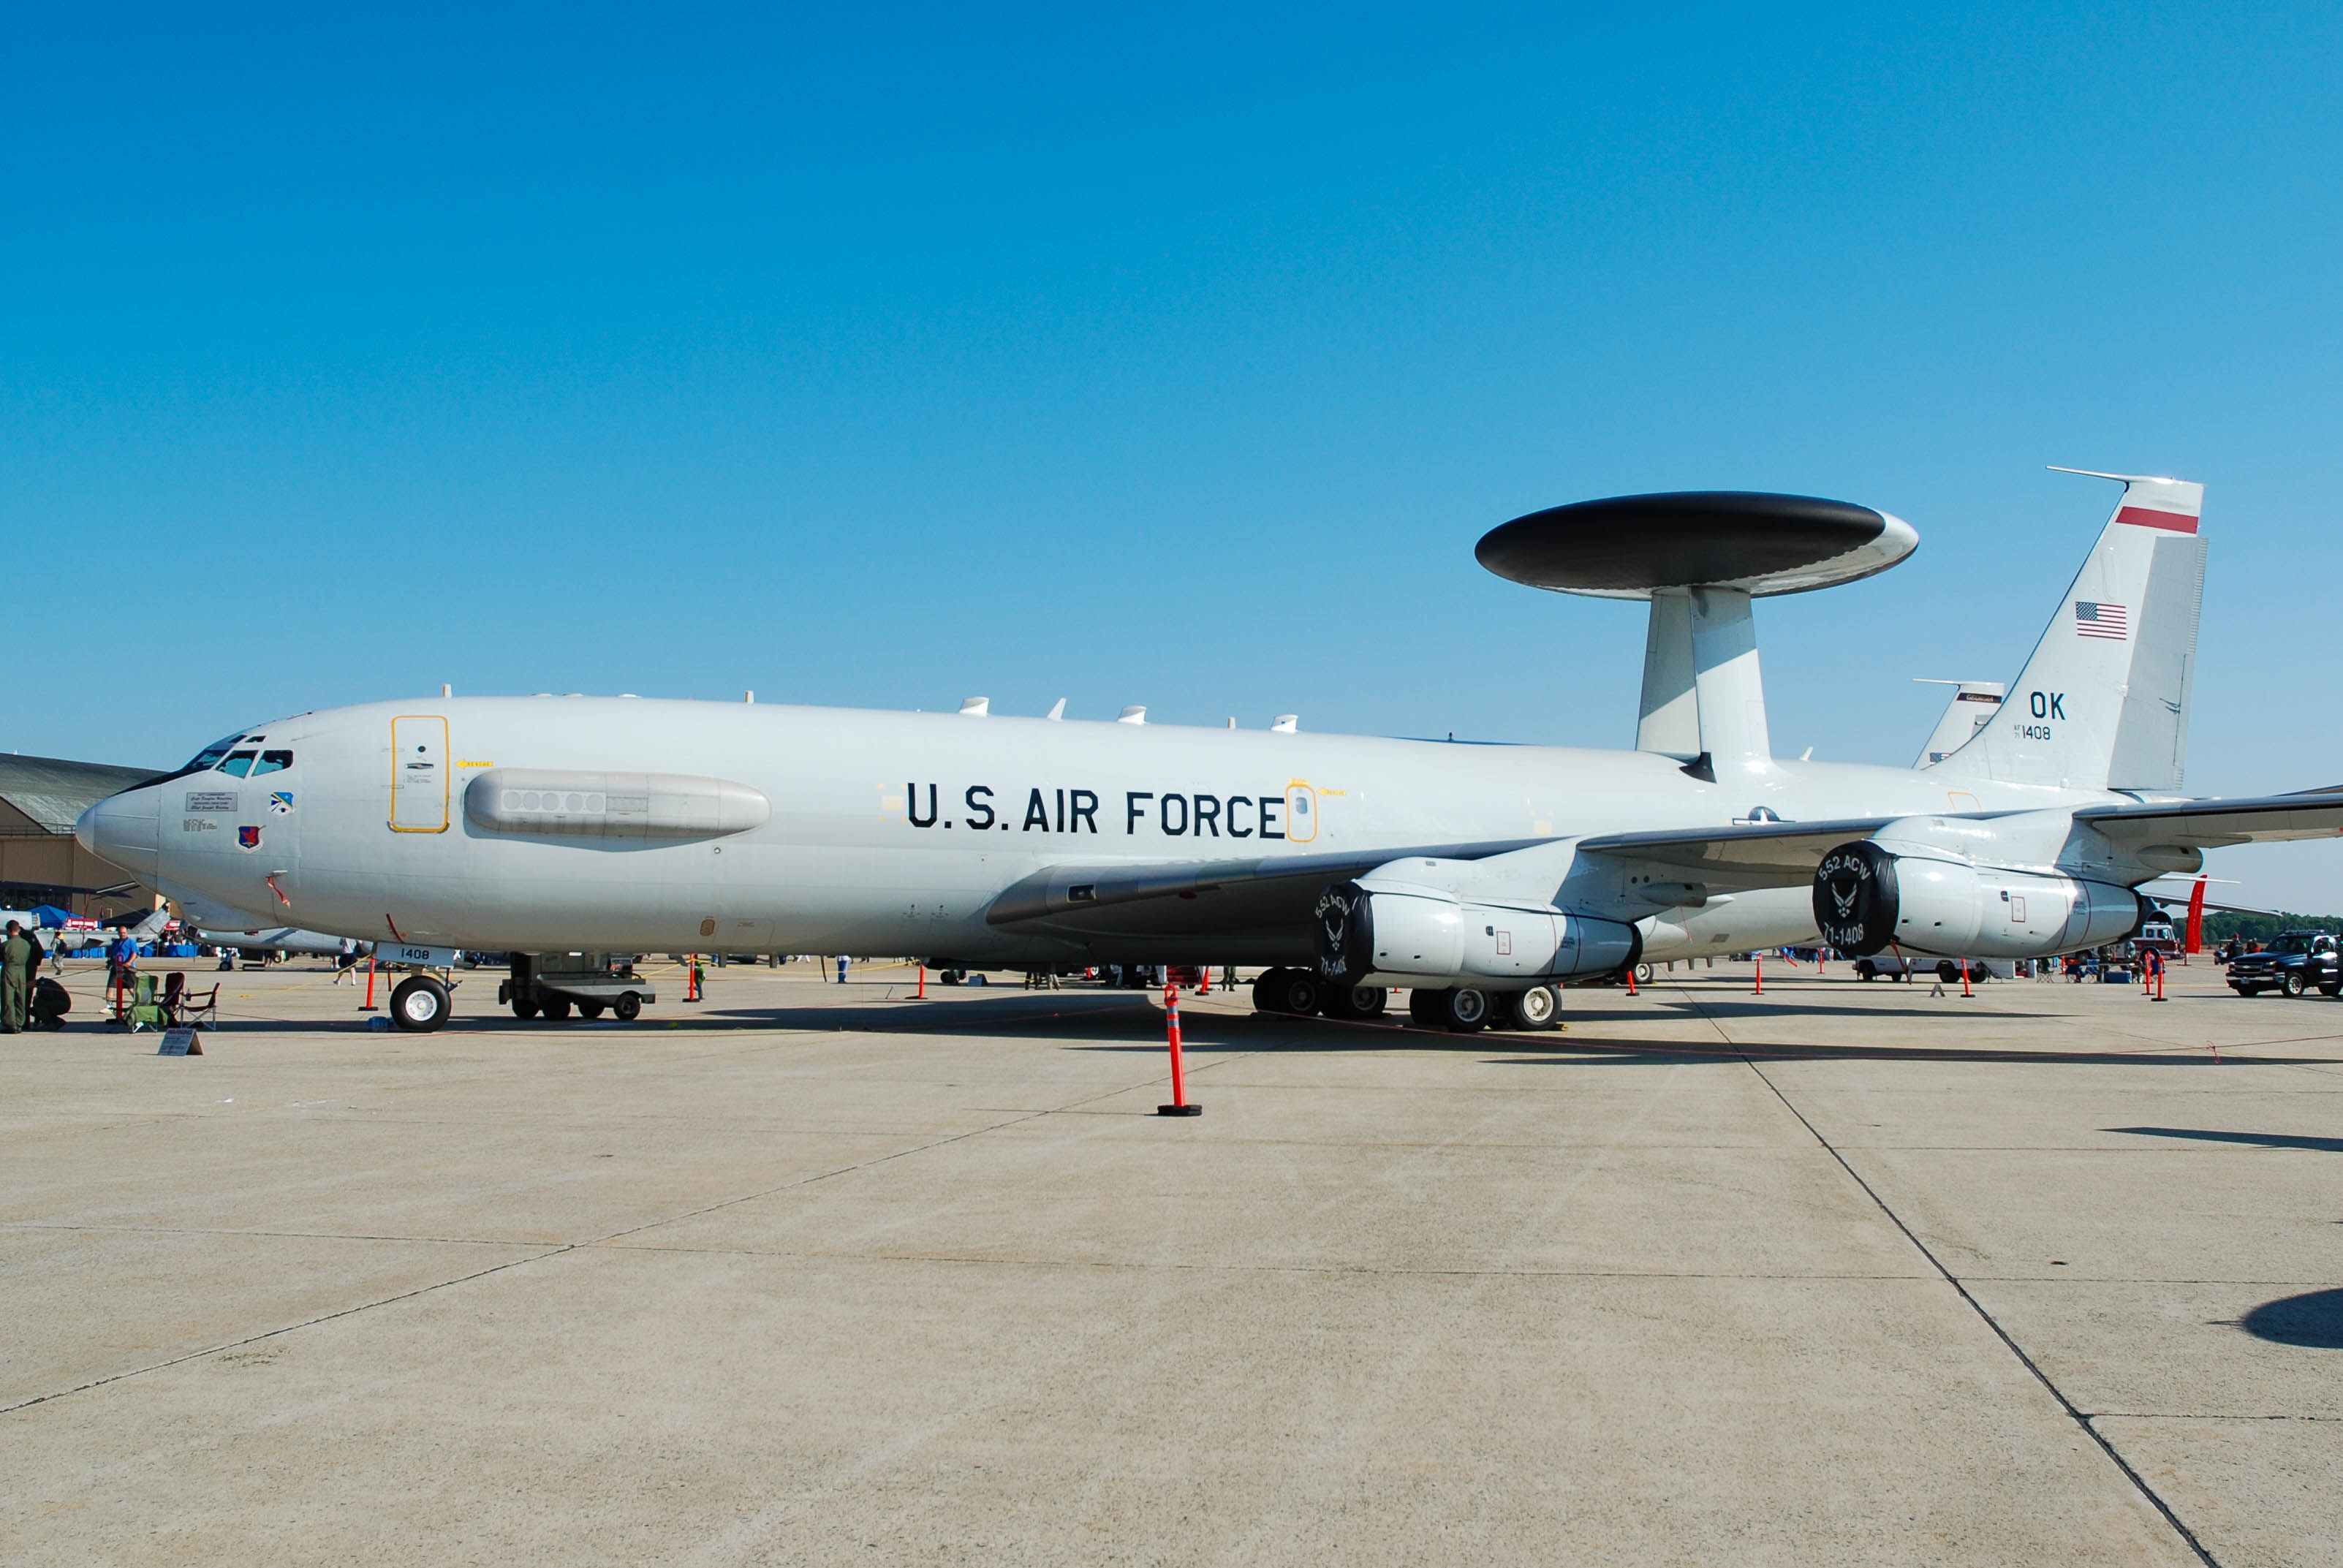 71-1408/711408 USAF - United States Air Force Boeing E-3A Sentry Photo by colinw - AVSpotters.com